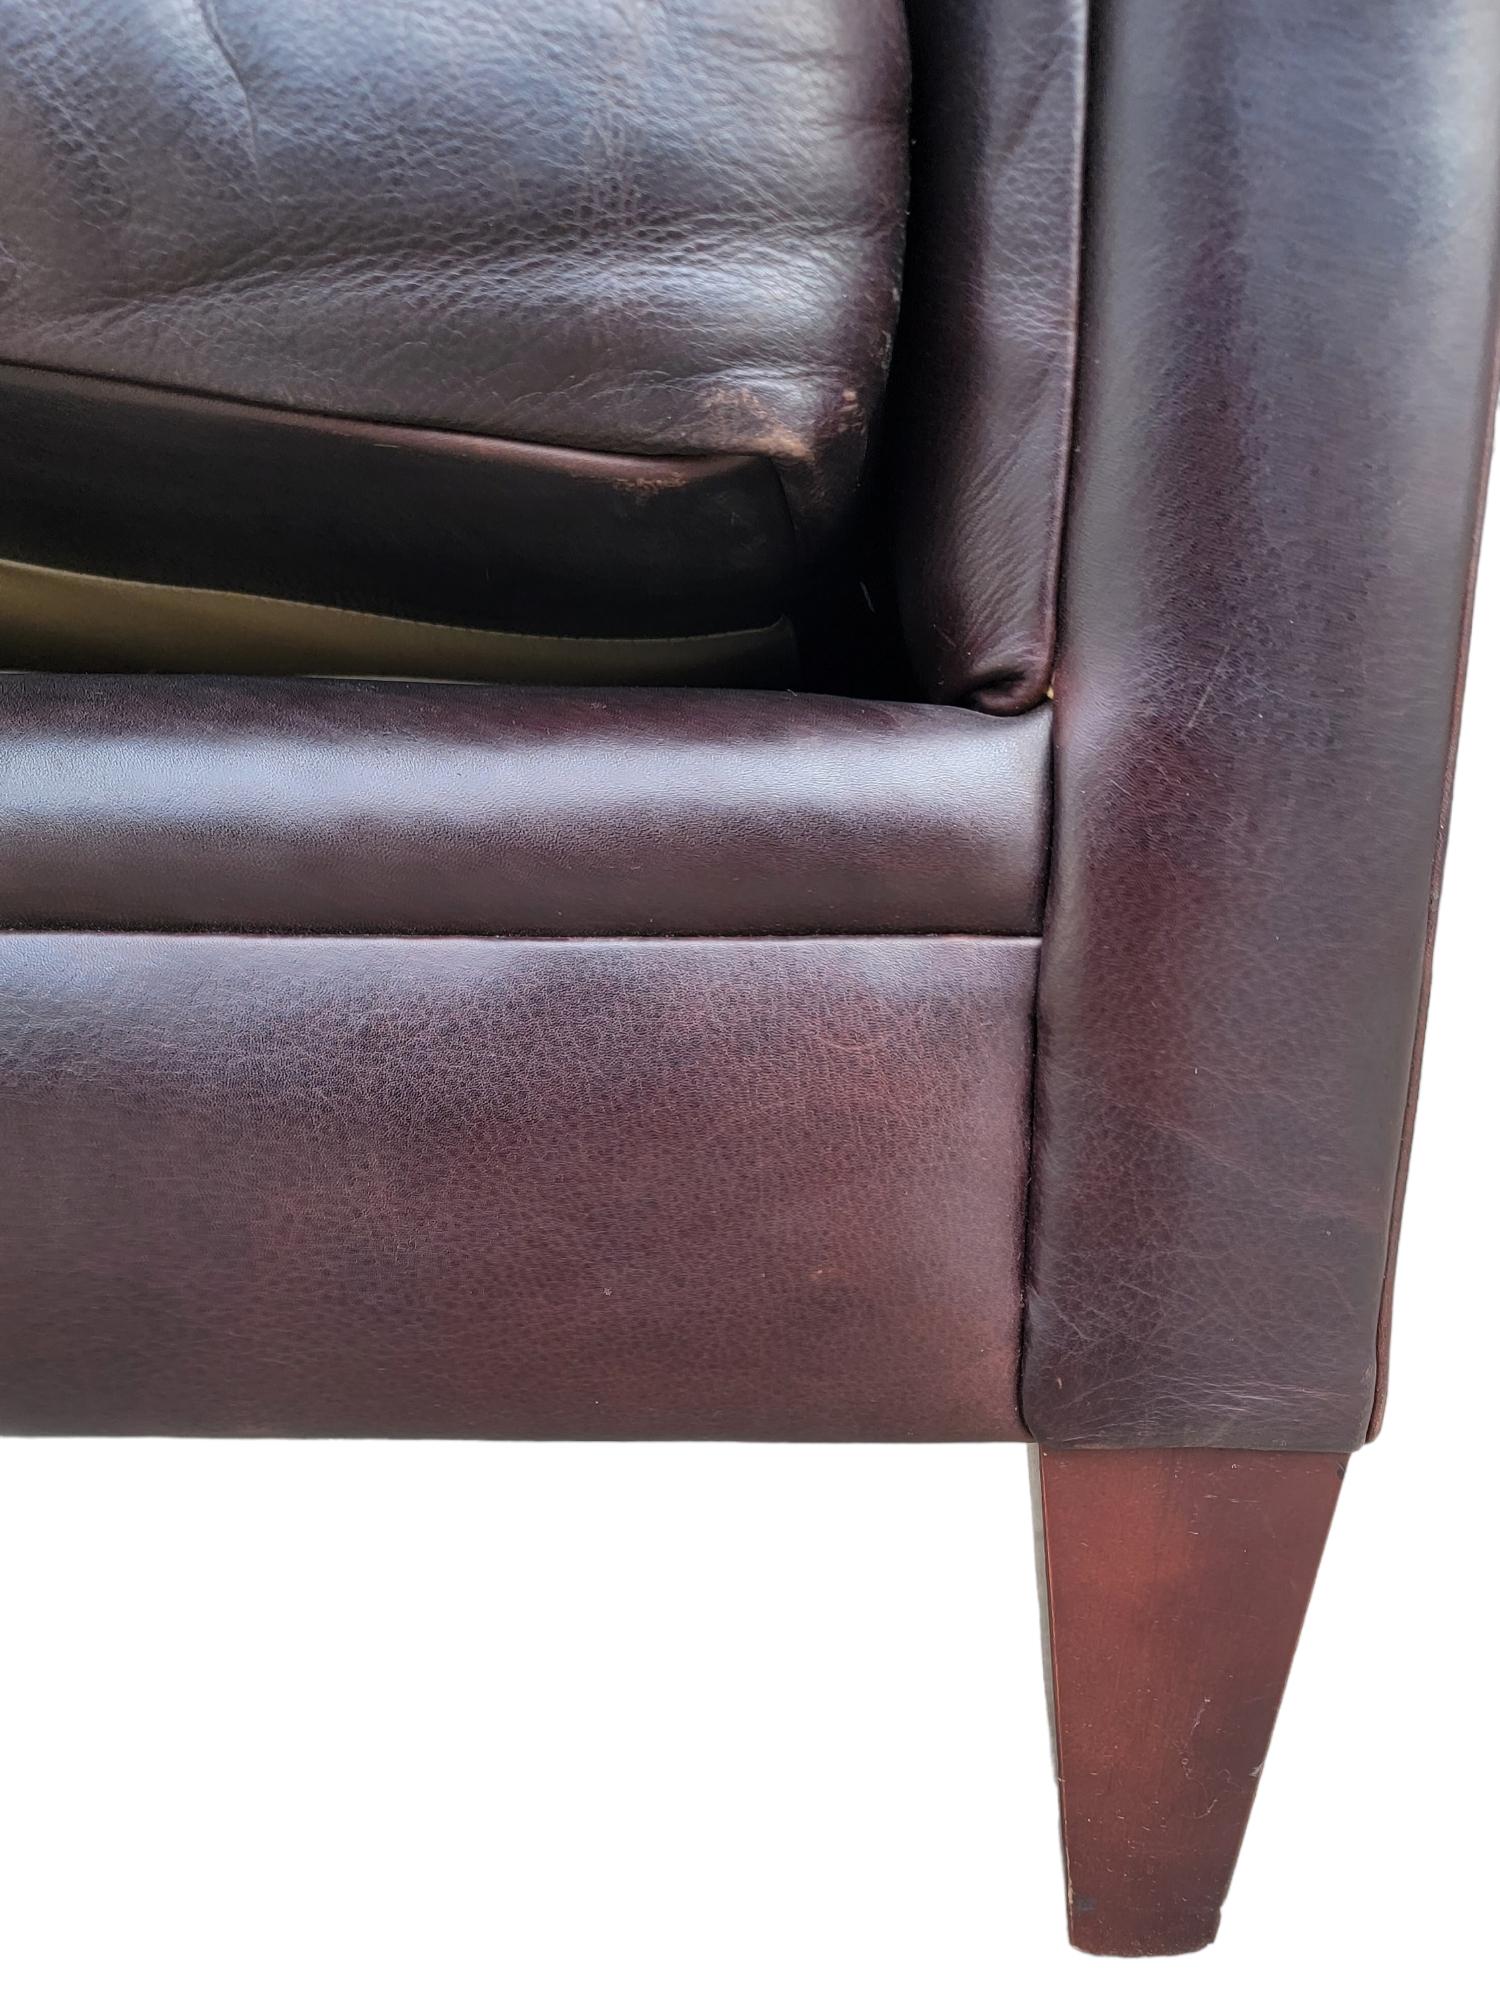  Fine Leather Club Chair In Good Condition For Sale In Los Angeles, CA